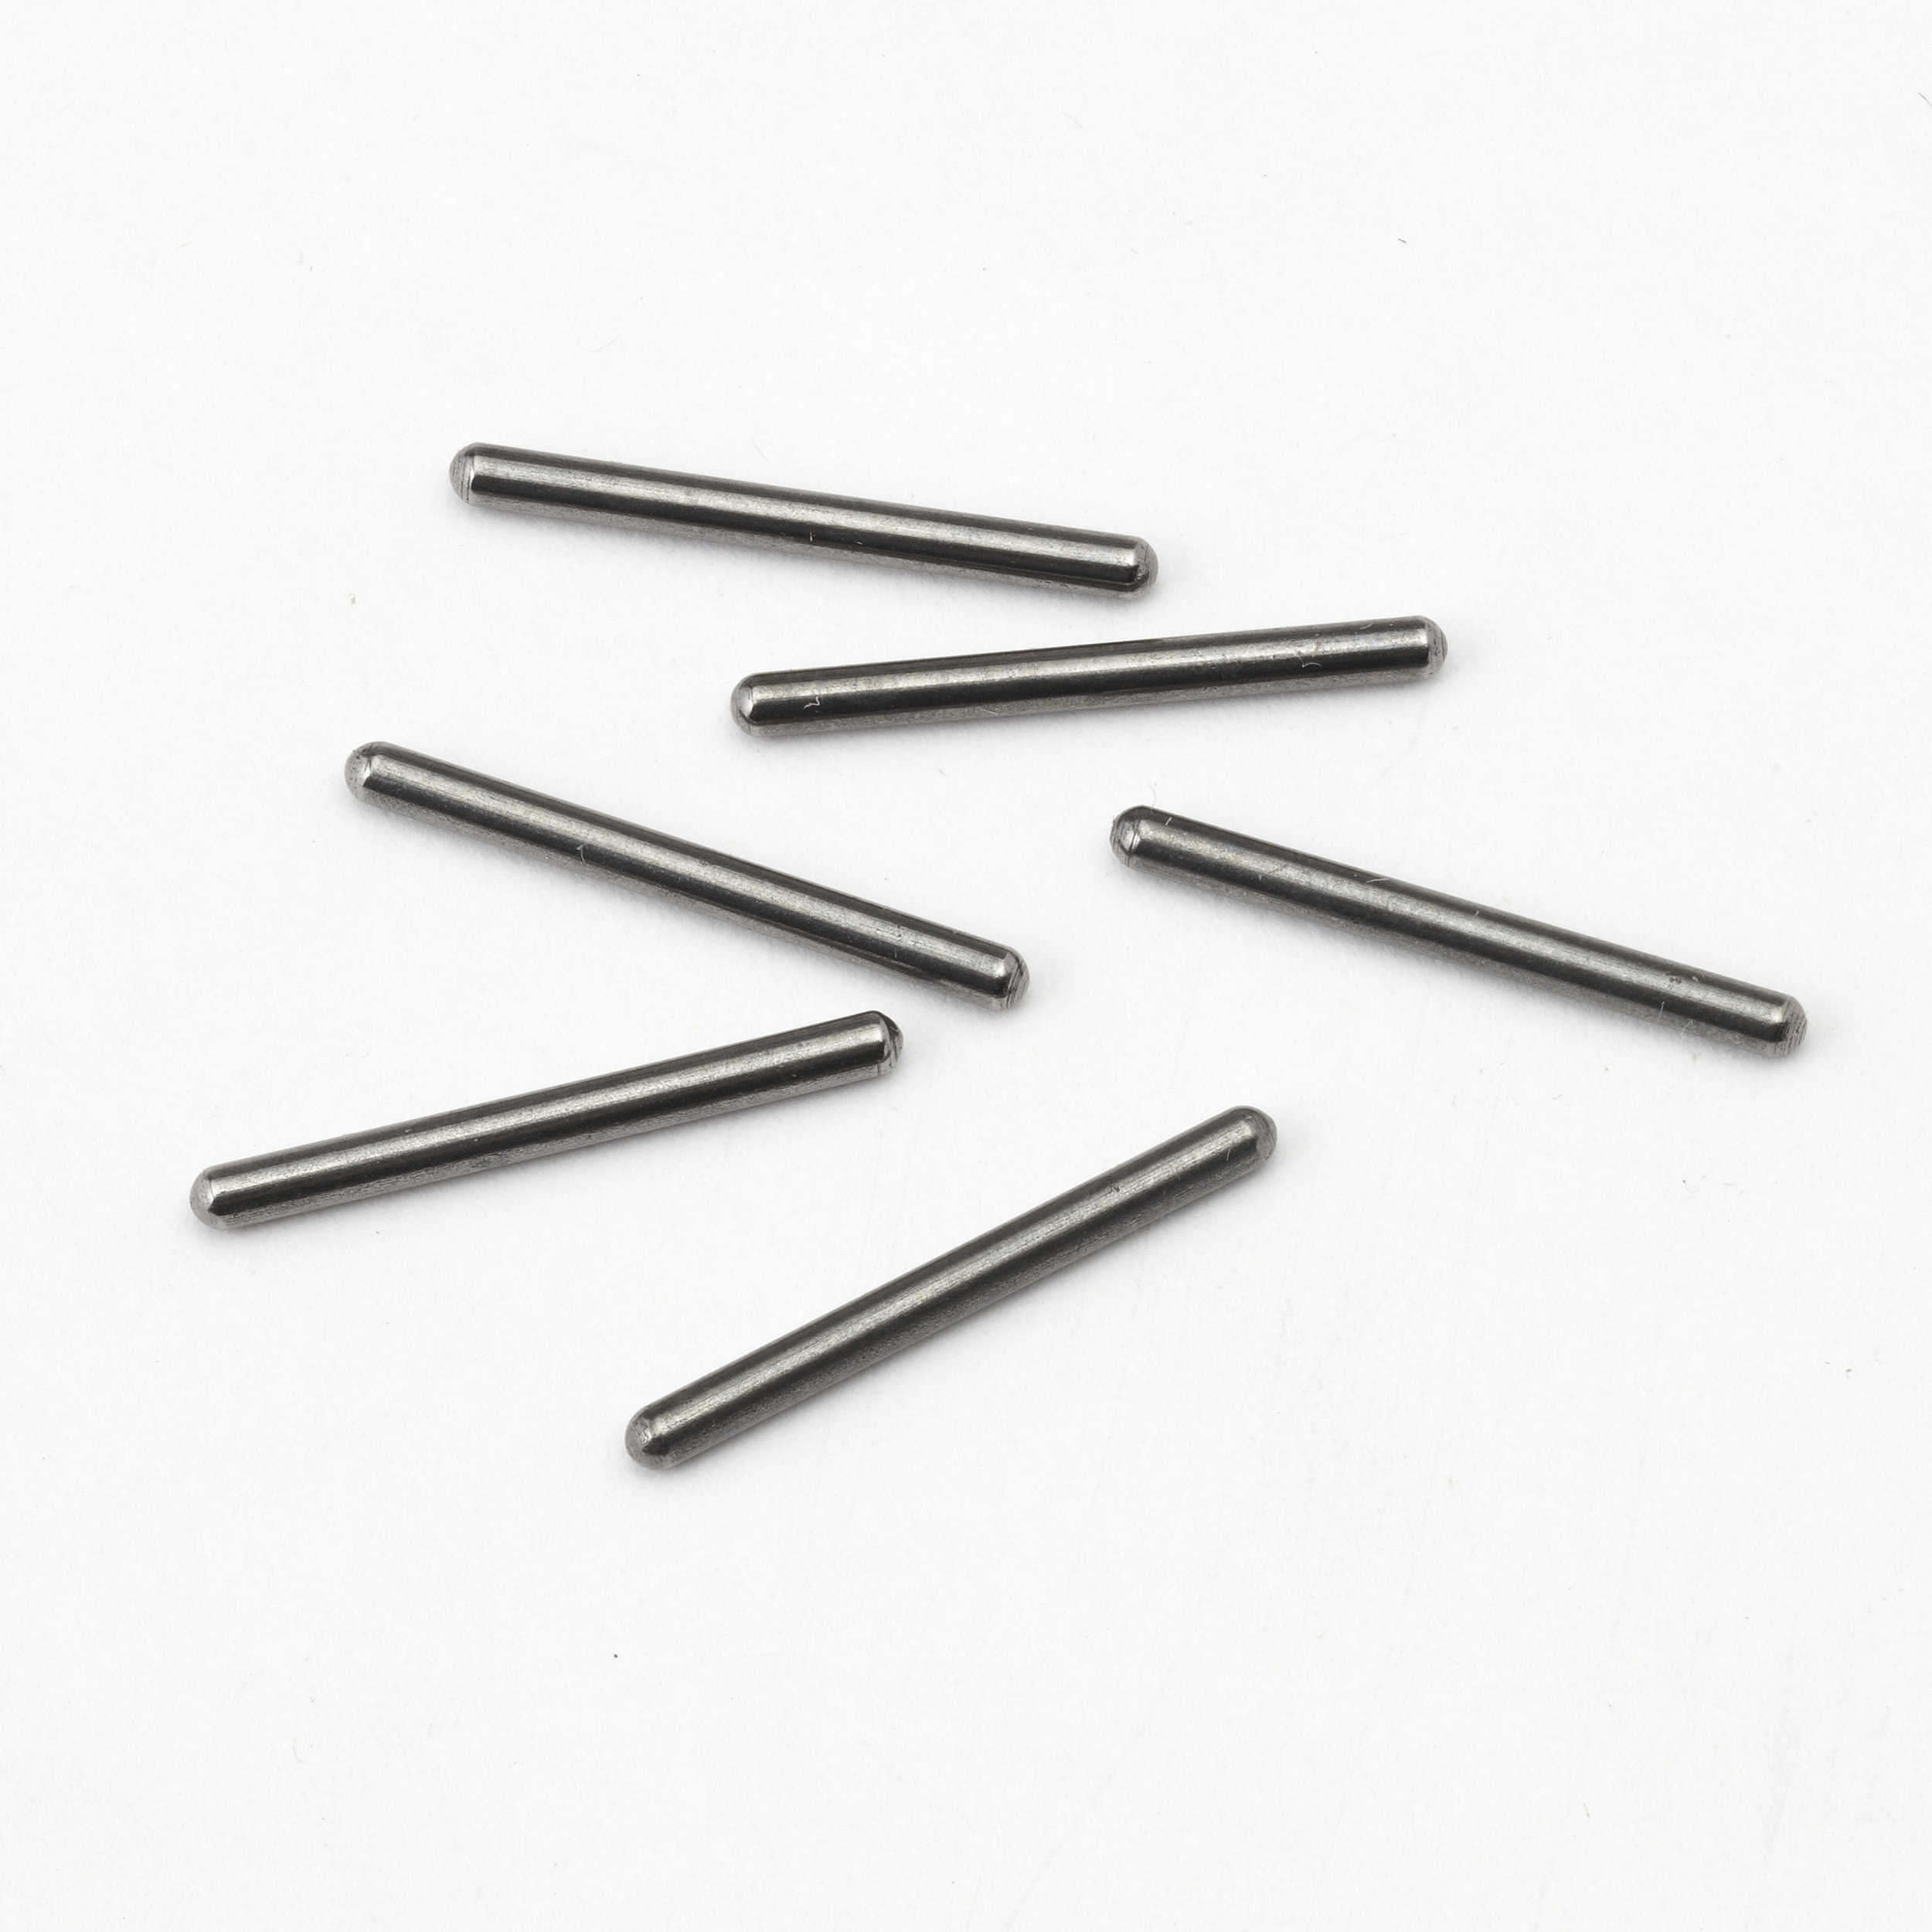 Hornady 060008 Universal Decapping Pins